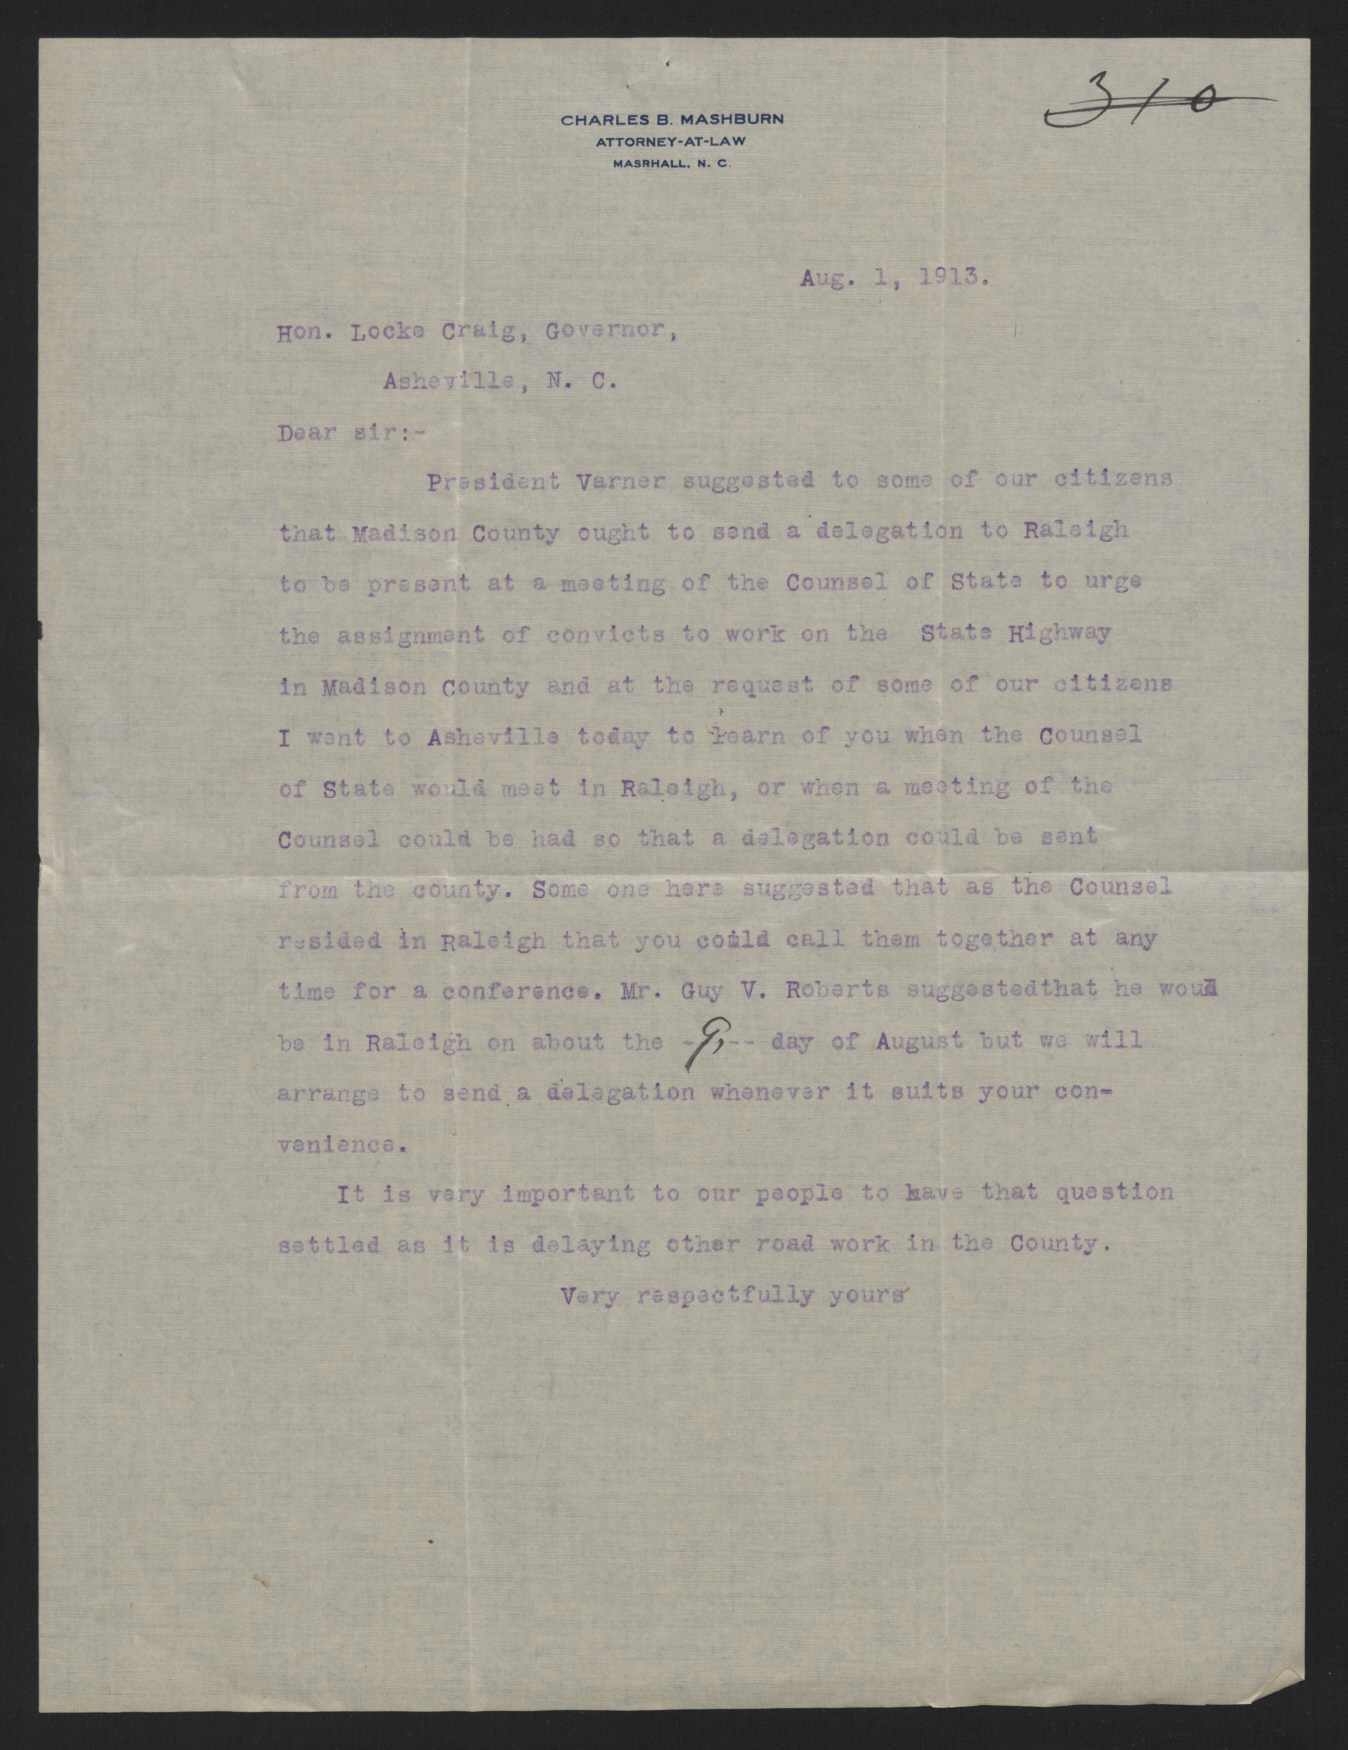 Letter from Mashburn to Craig, August 1, 1913